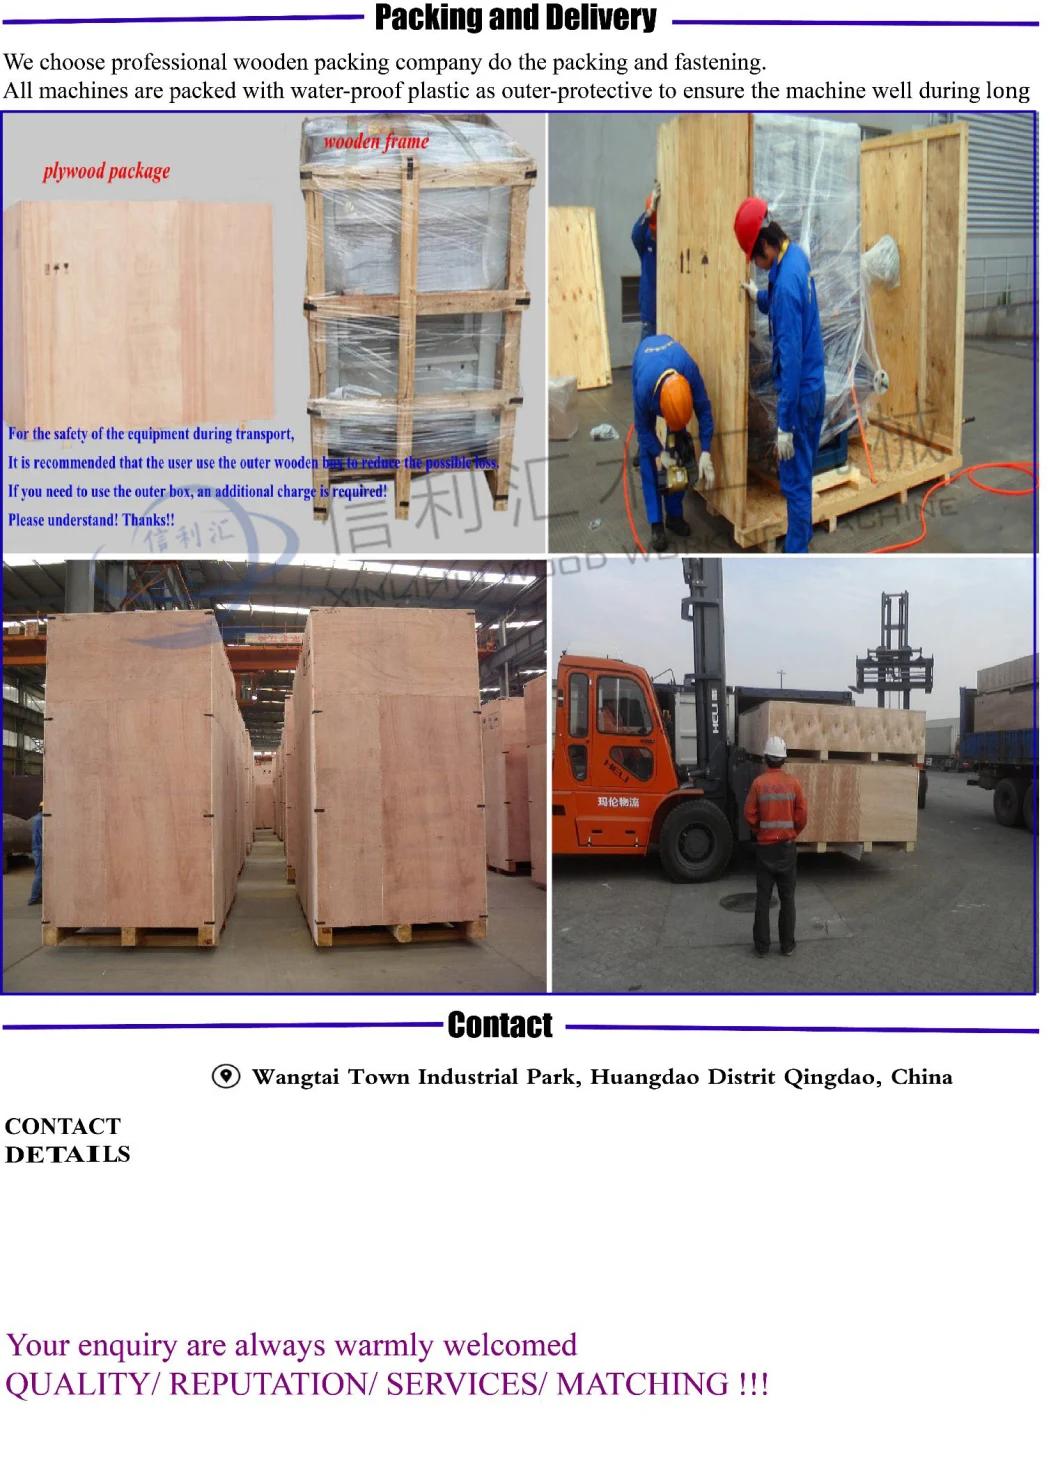 Two Motors Furniture Manufacturing Wood Board Jointing Machine Jointer/ Composer/ Clamp /Fixture Carrier with Hydraulic Press